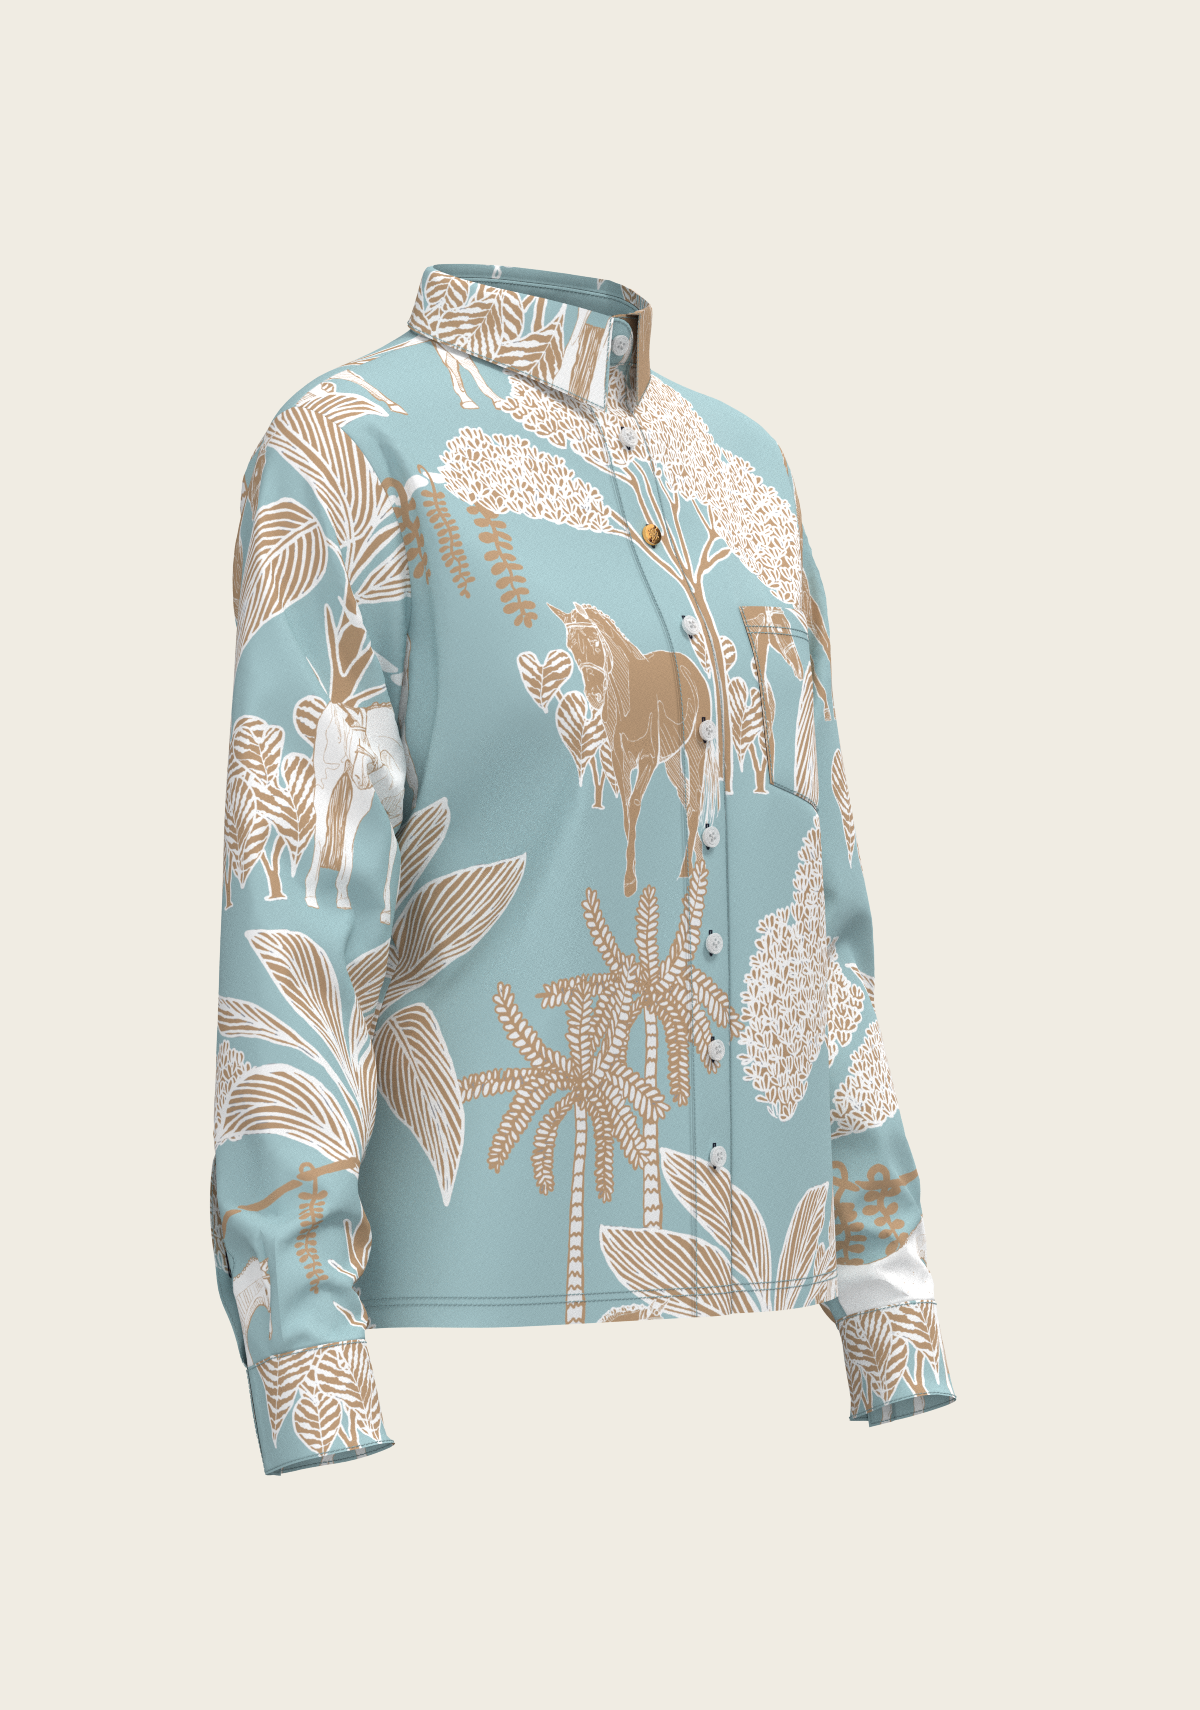  Island Horses on Sky Blue Loose Fitting Button Shirt